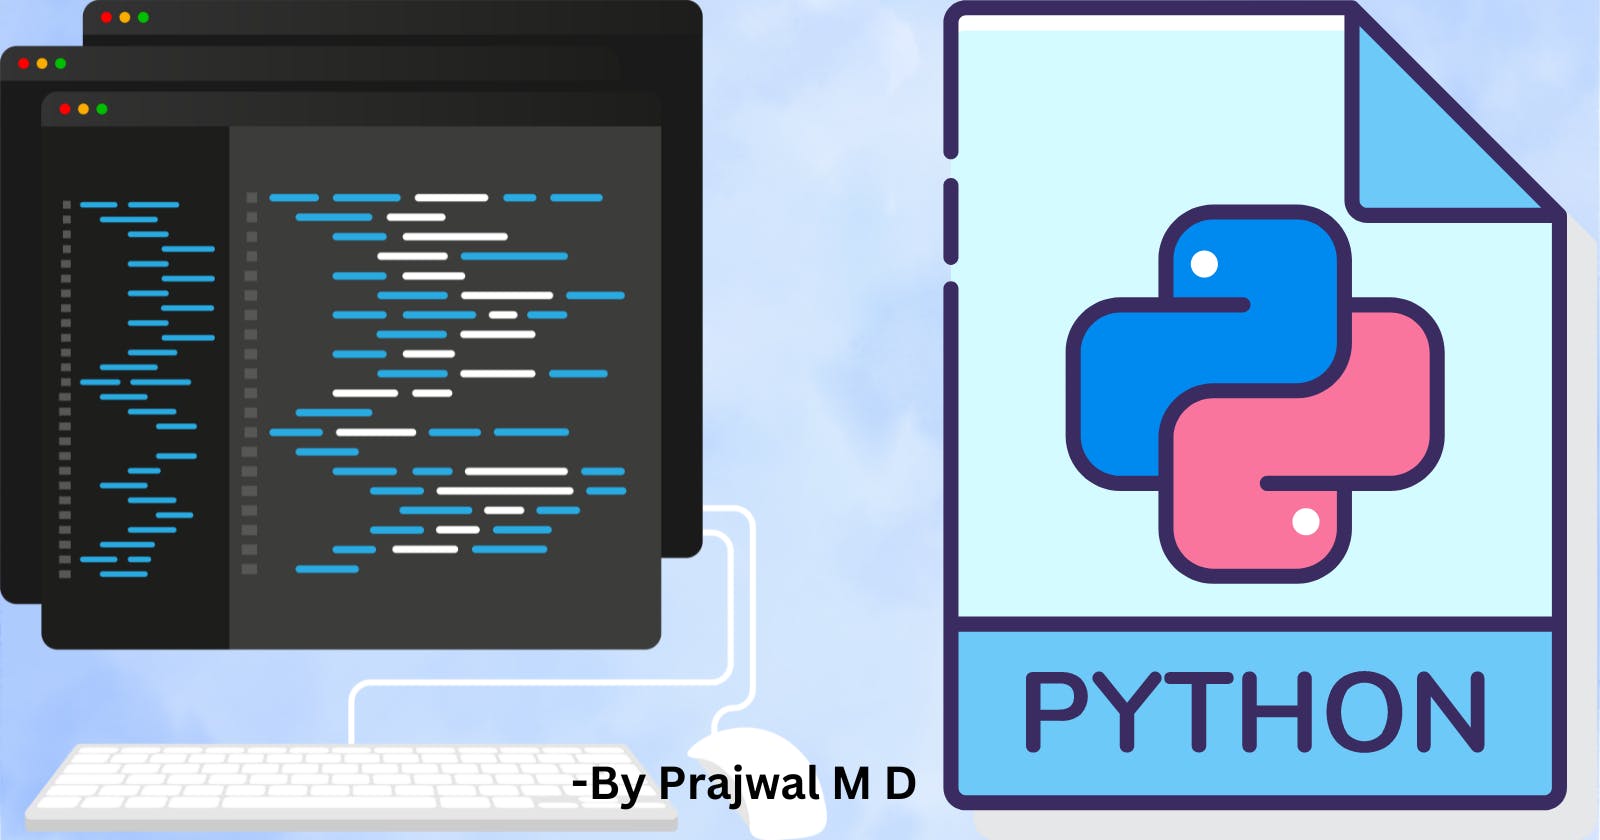 Introduction to IBM's Python for Data Science Course